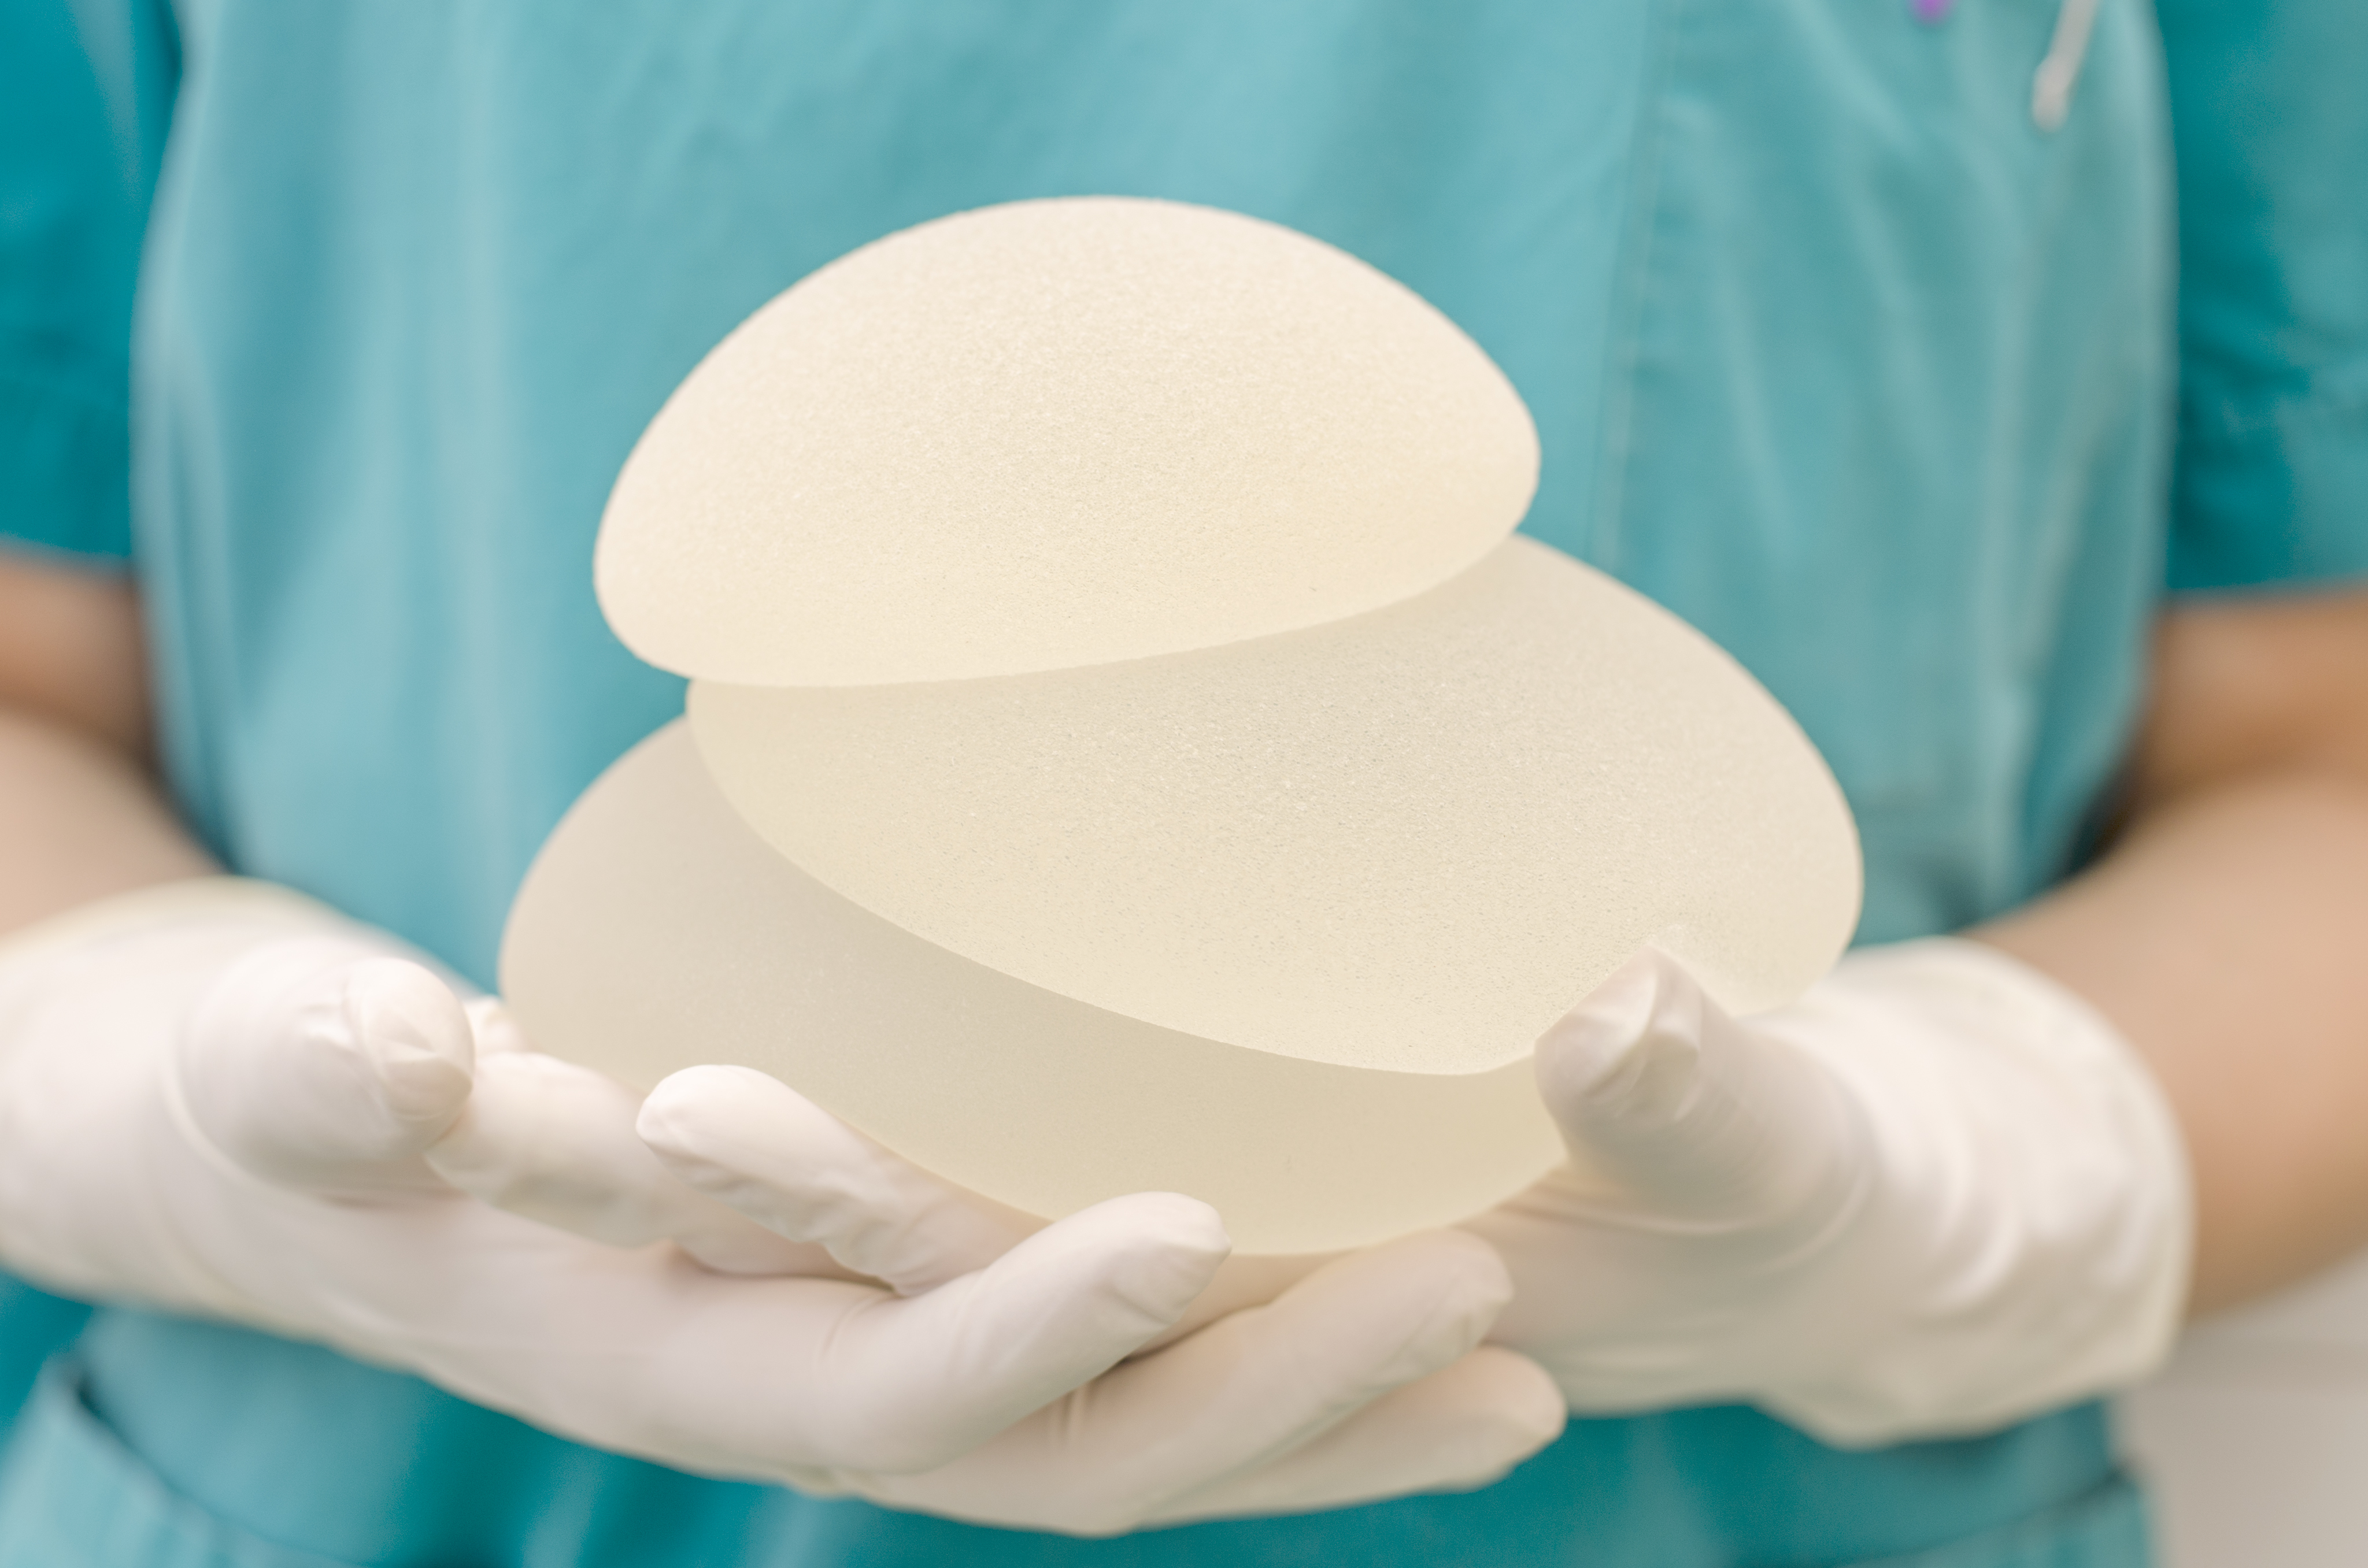 Silicone gel filled breast implants manufactured by PIP